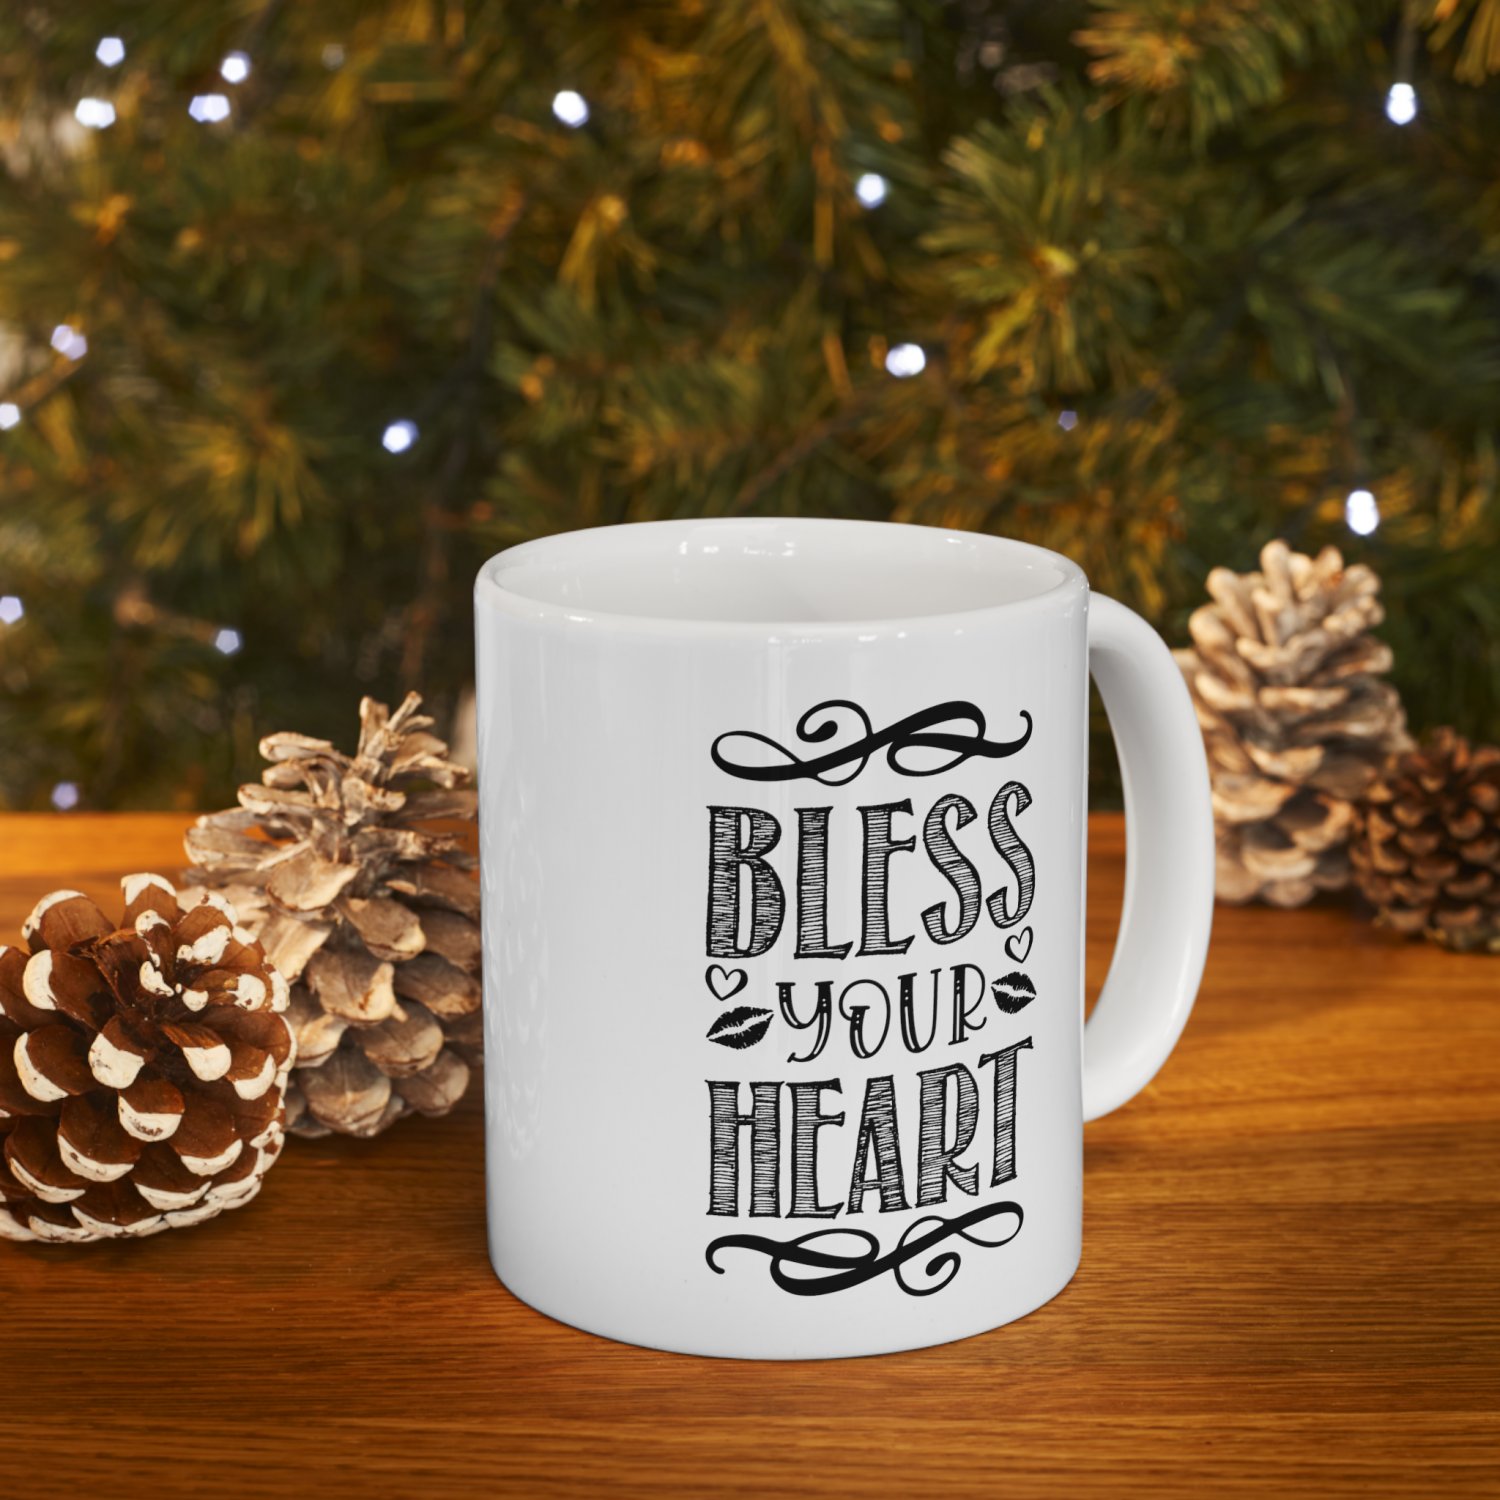 Bless Your Heart Coffee Cup Ceramic Mug 11oz